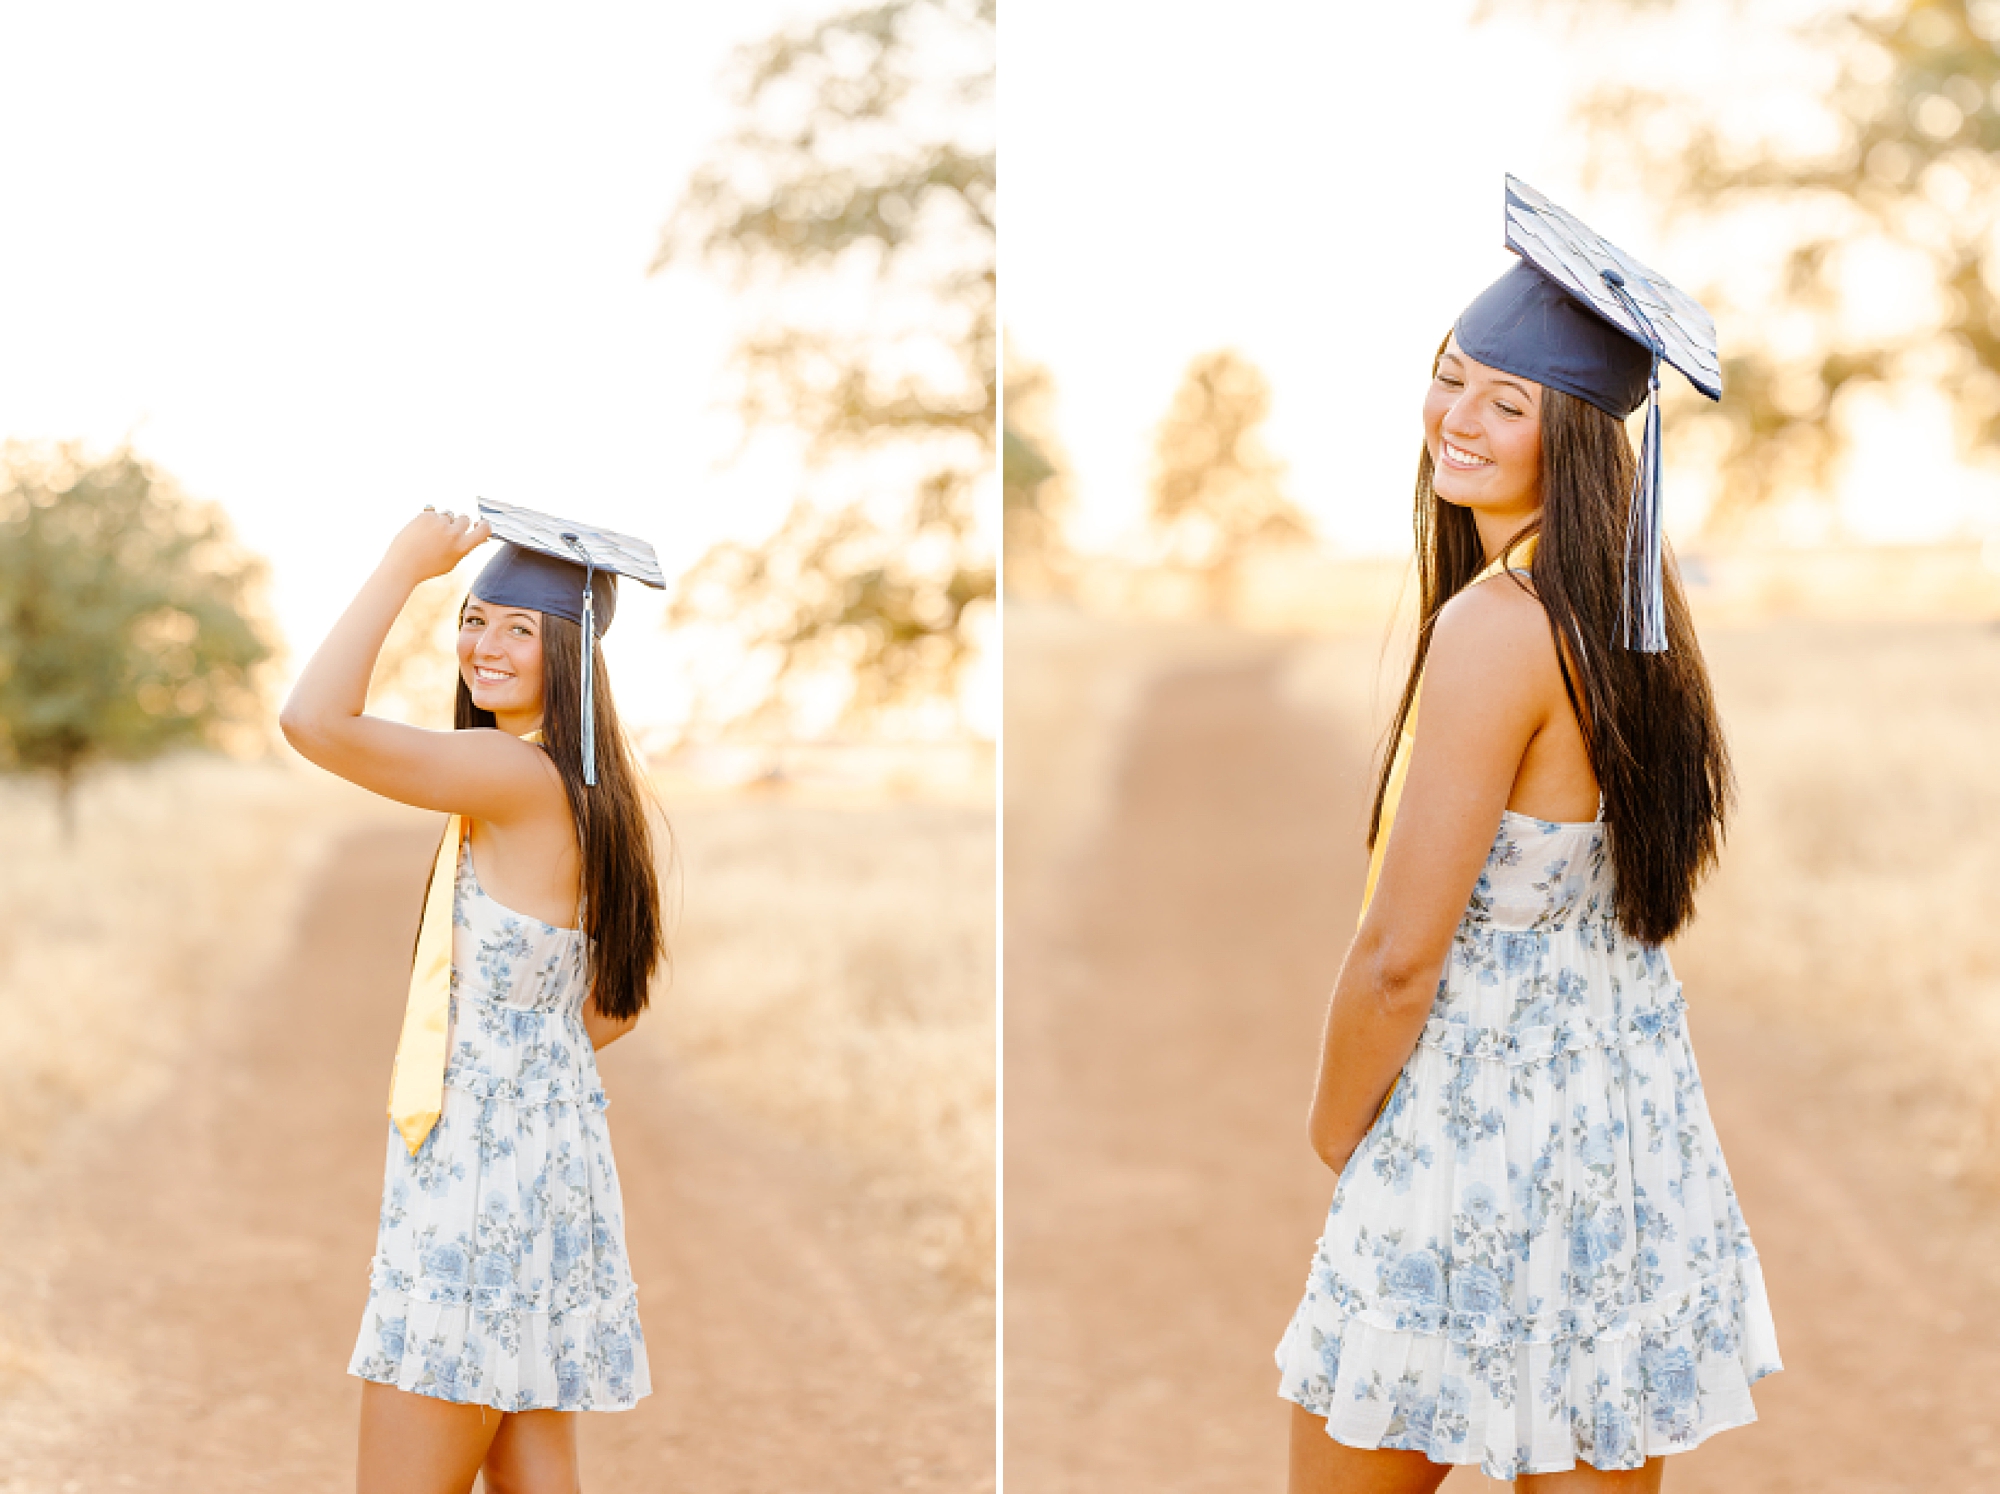 Cap and gown senior rep session